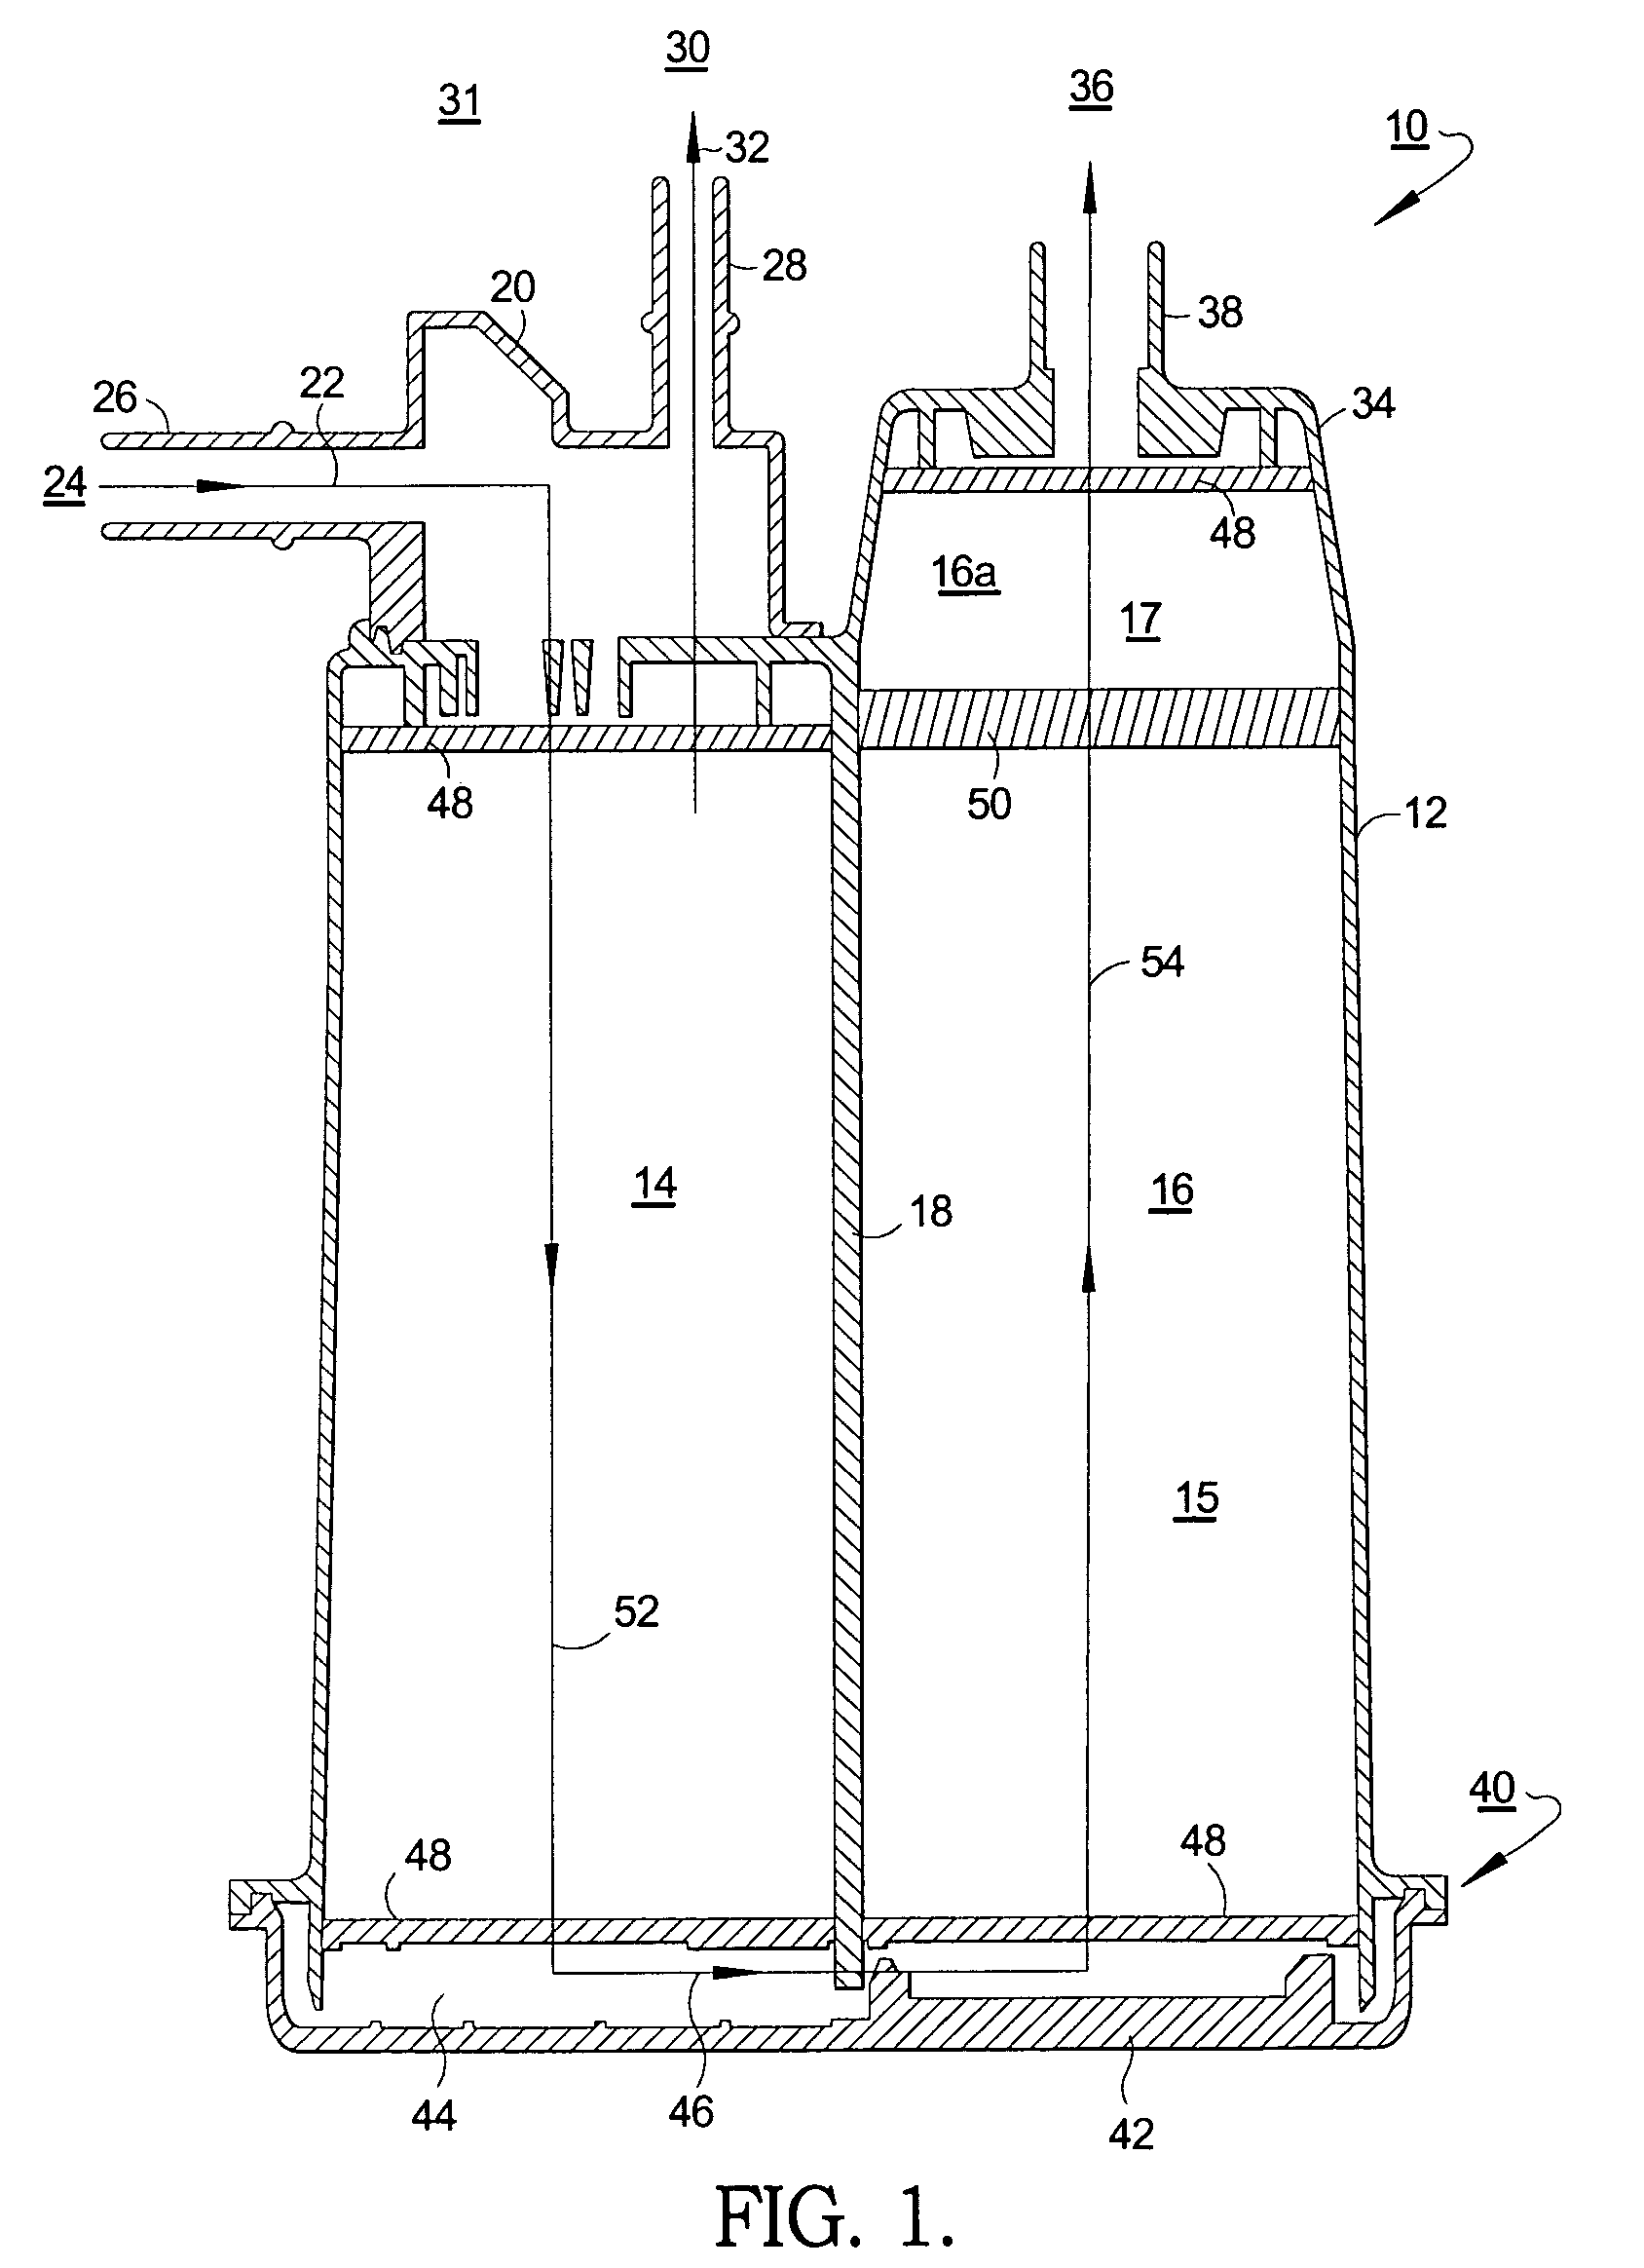 Resilient sling for mounting a carbon monolith in an evaporative emissions canister